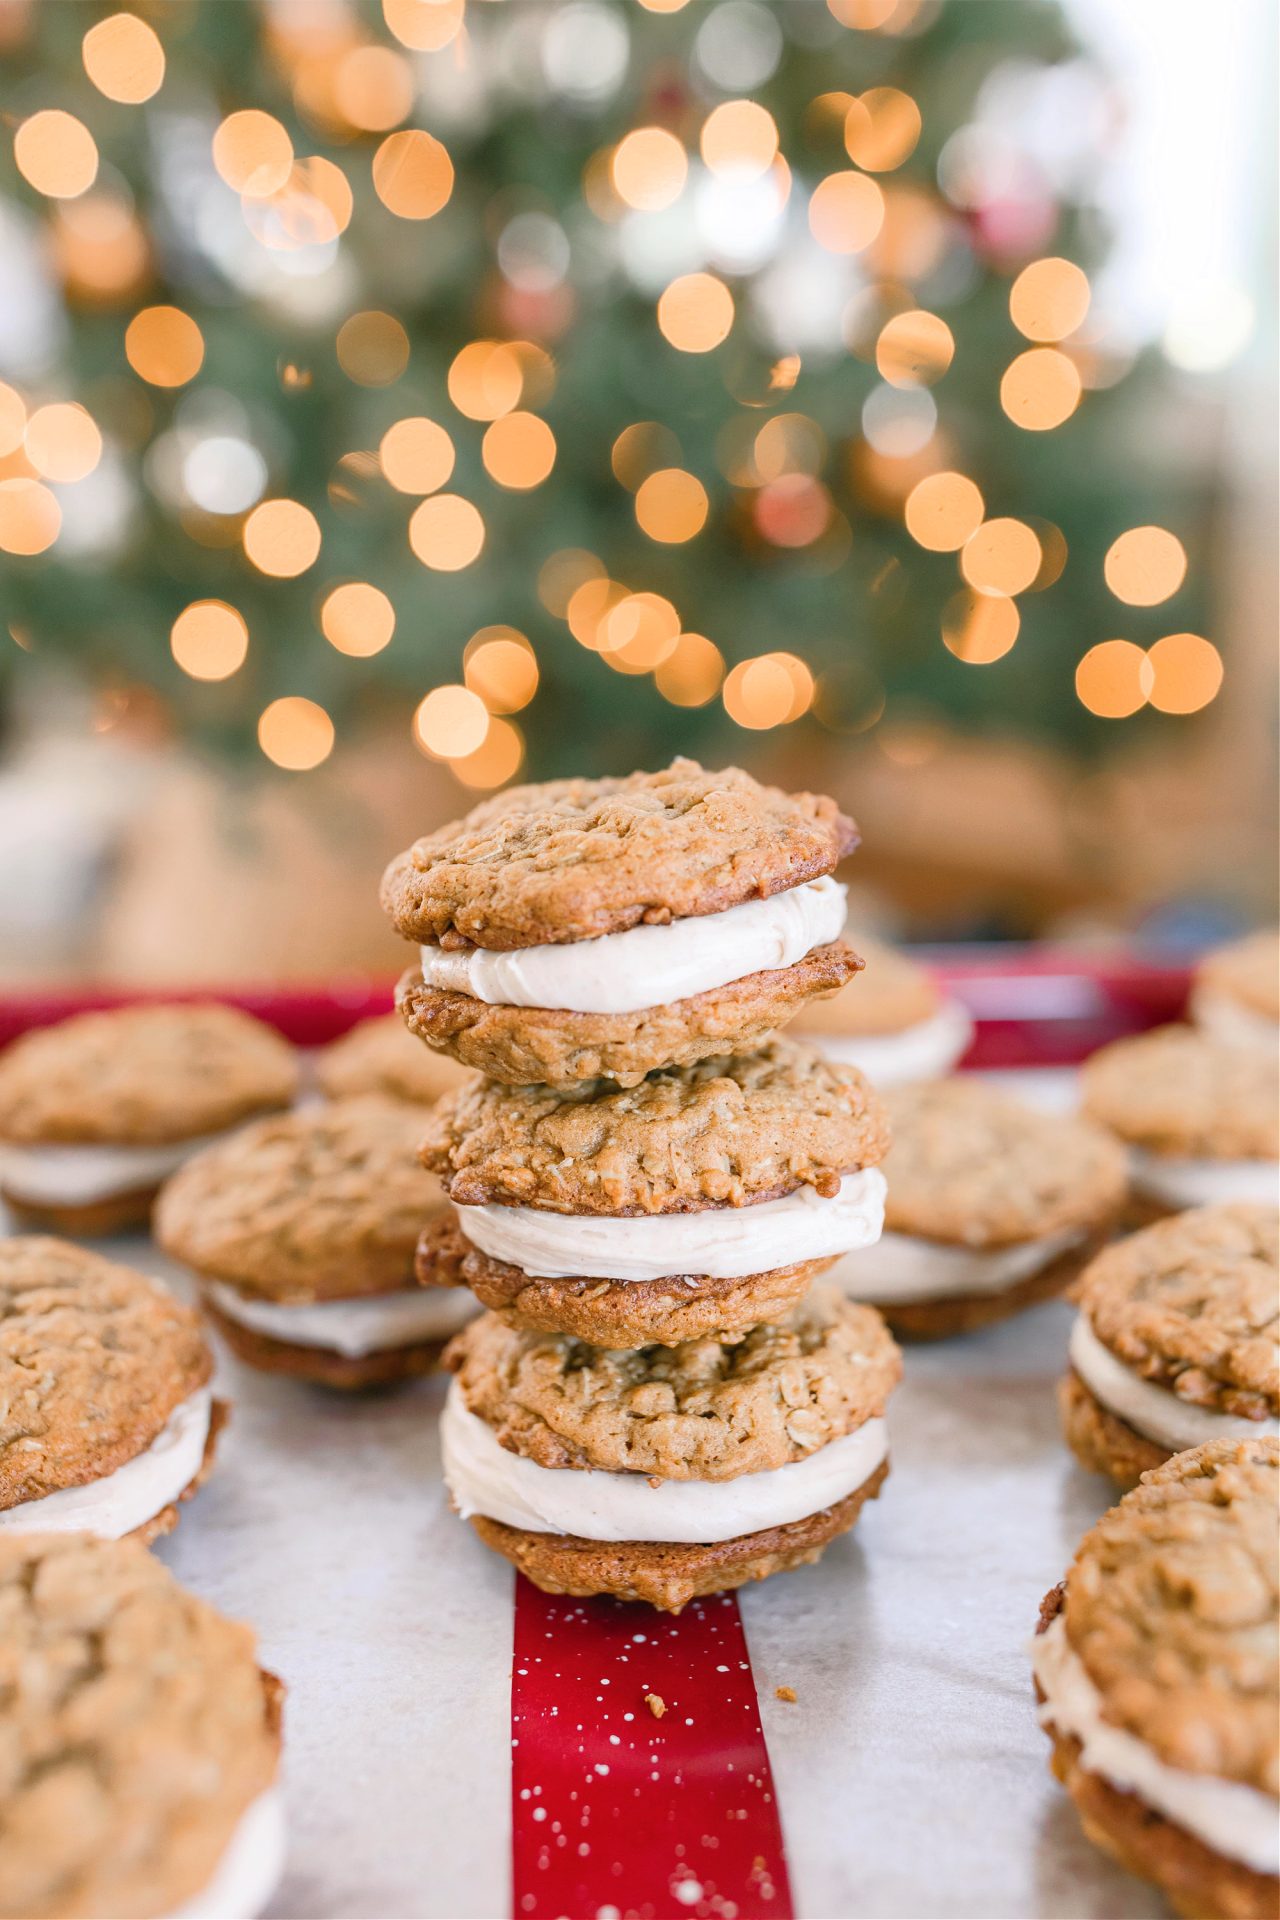 gingerbread oatmeal cookies, gingerbread oatmeal cookies with chai tea latte buttercream, desserts, holiday deserts, christmas cooking, baking holiday baking, tasty cookies, recipe, cookie exchange ideas, oatmeal cream pies